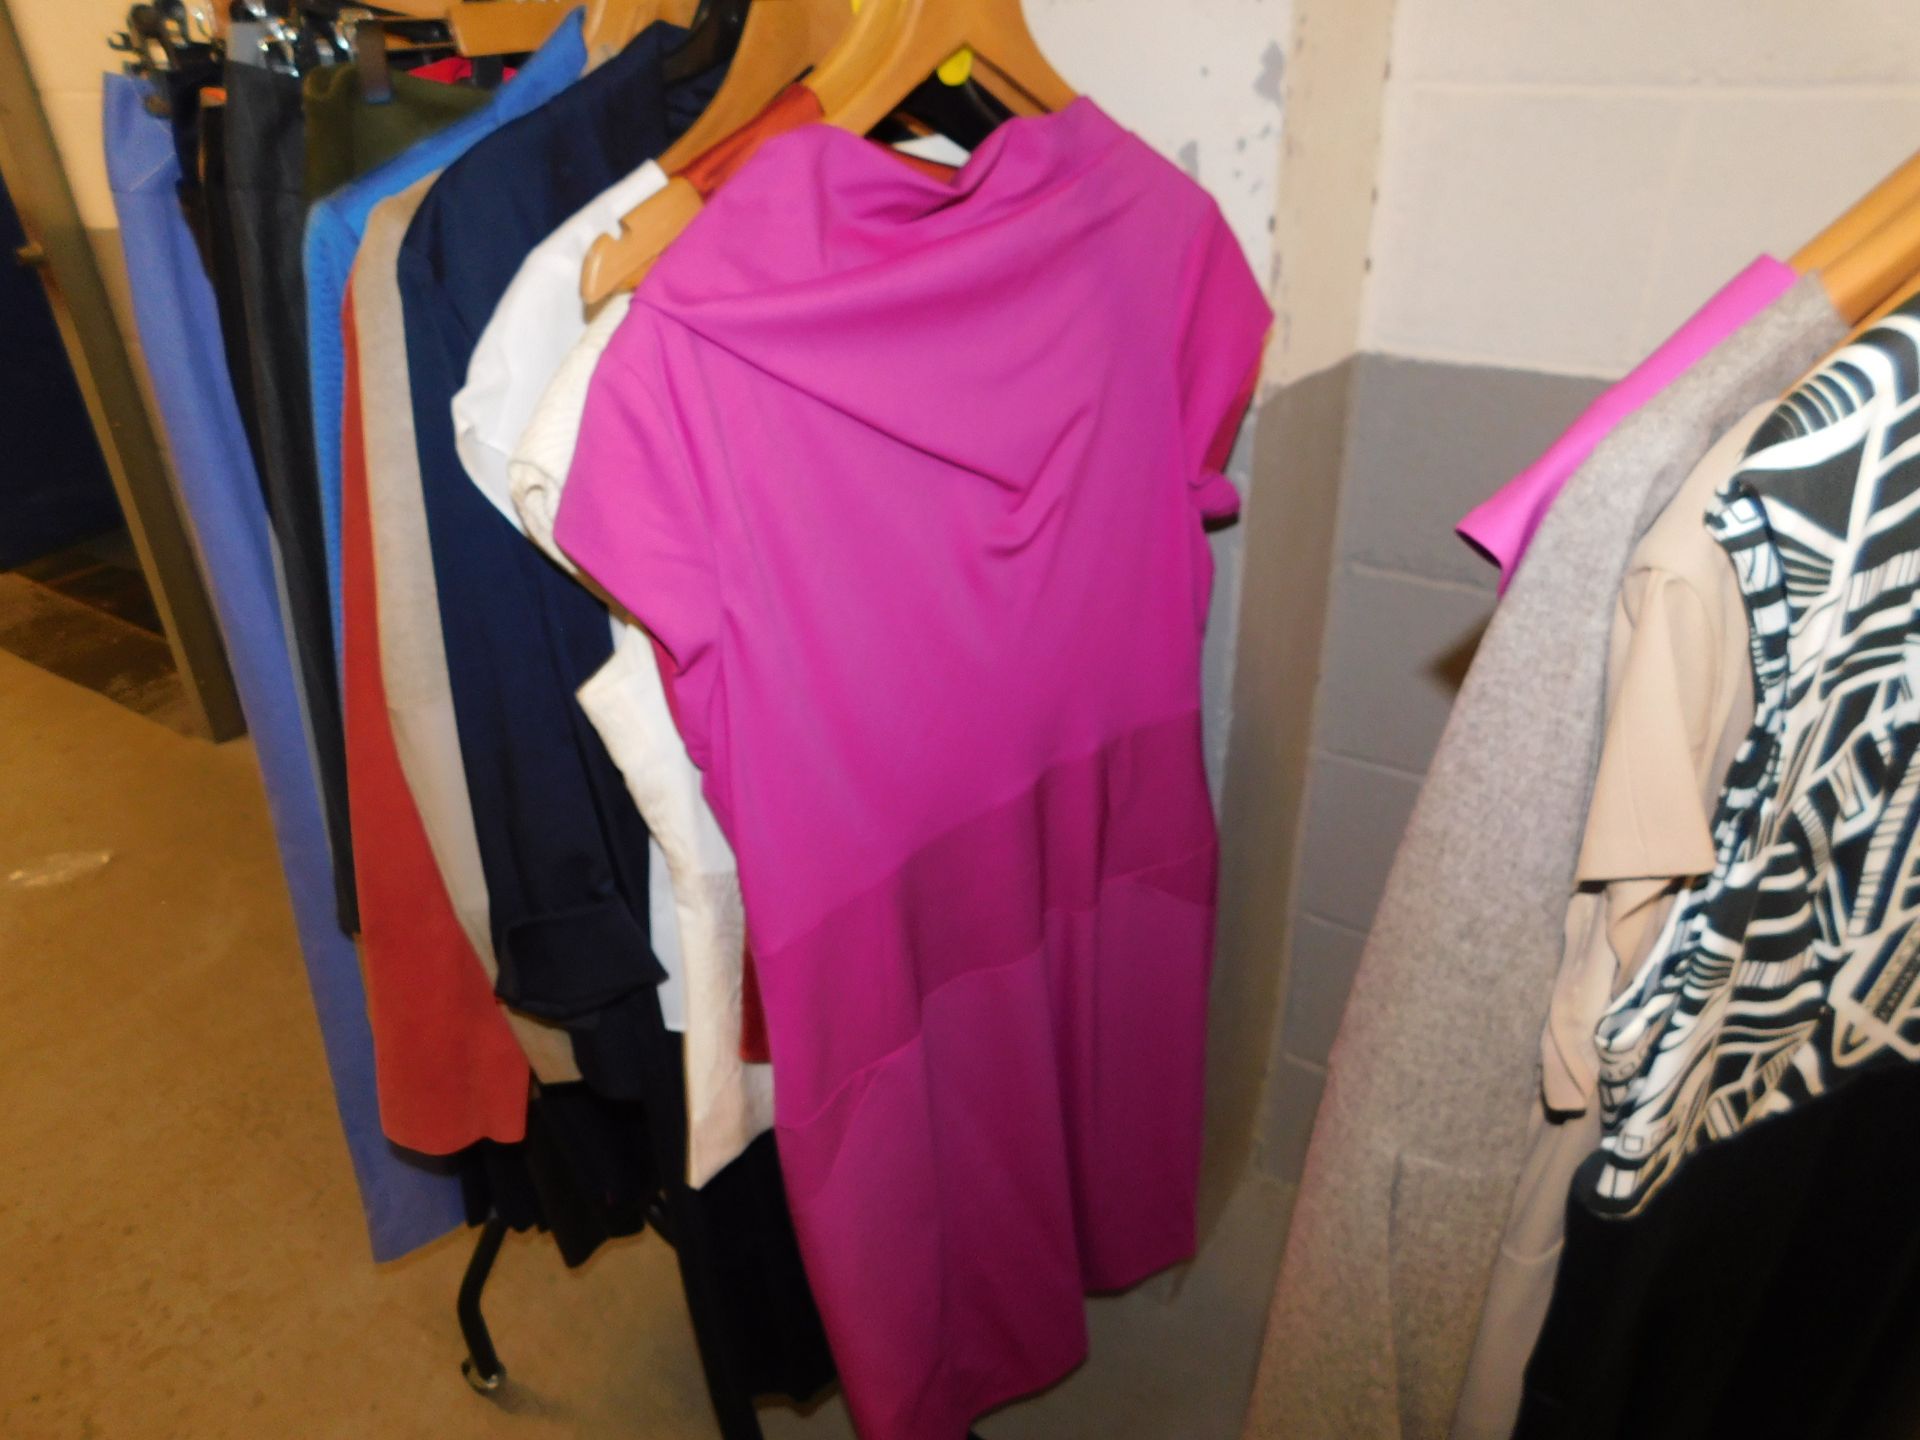 Contents of Rail of "Number 35" Ladies Business Wear, Size 16 (7 Skirts, 8  Tops/Dresses, 6 Jackets, - Image 8 of 9